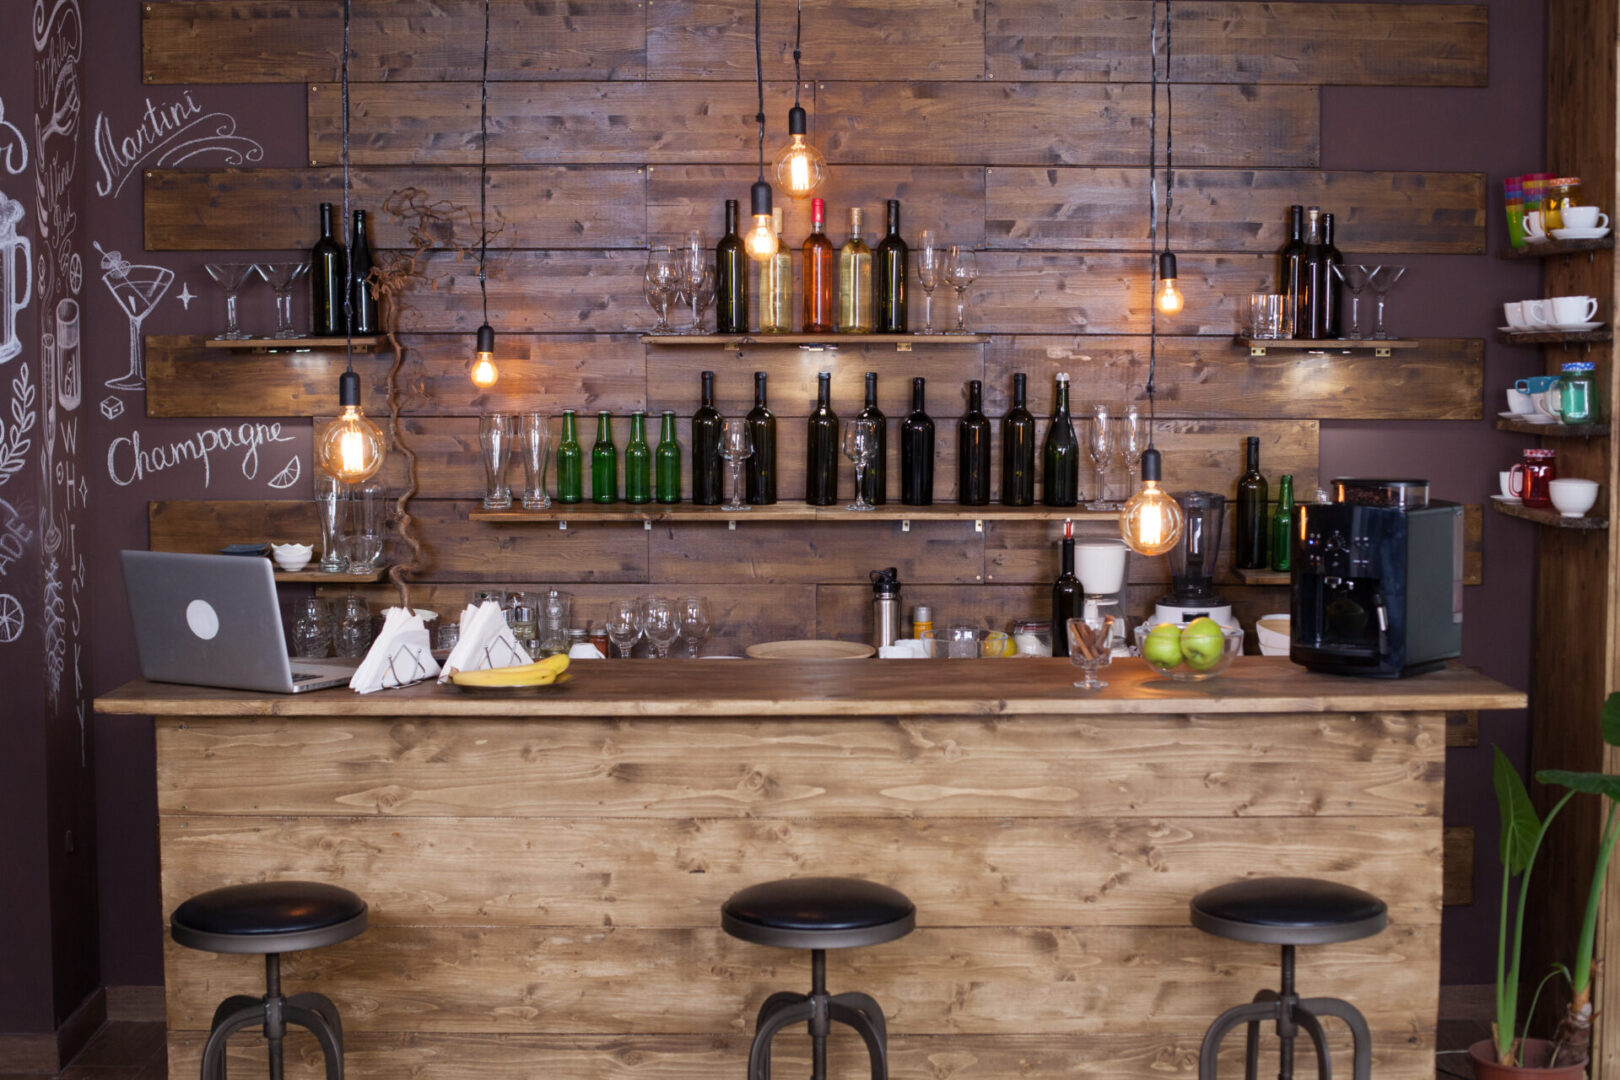 A bar with three stools and bottles on the wall.